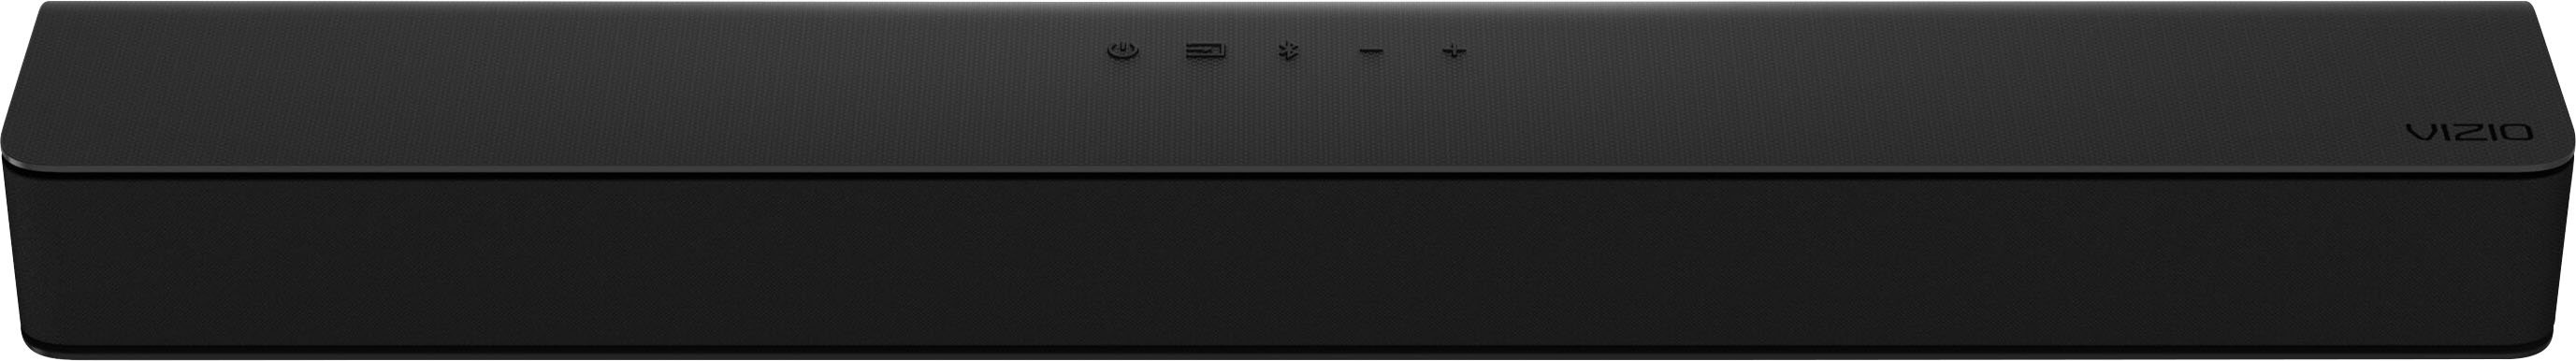 VIZIO 2.1-Channel V-Series Home Theater Sound Bar with DTS Virtual:X and  Wireless Subwoofer Black V21t-J8 - Best Buy